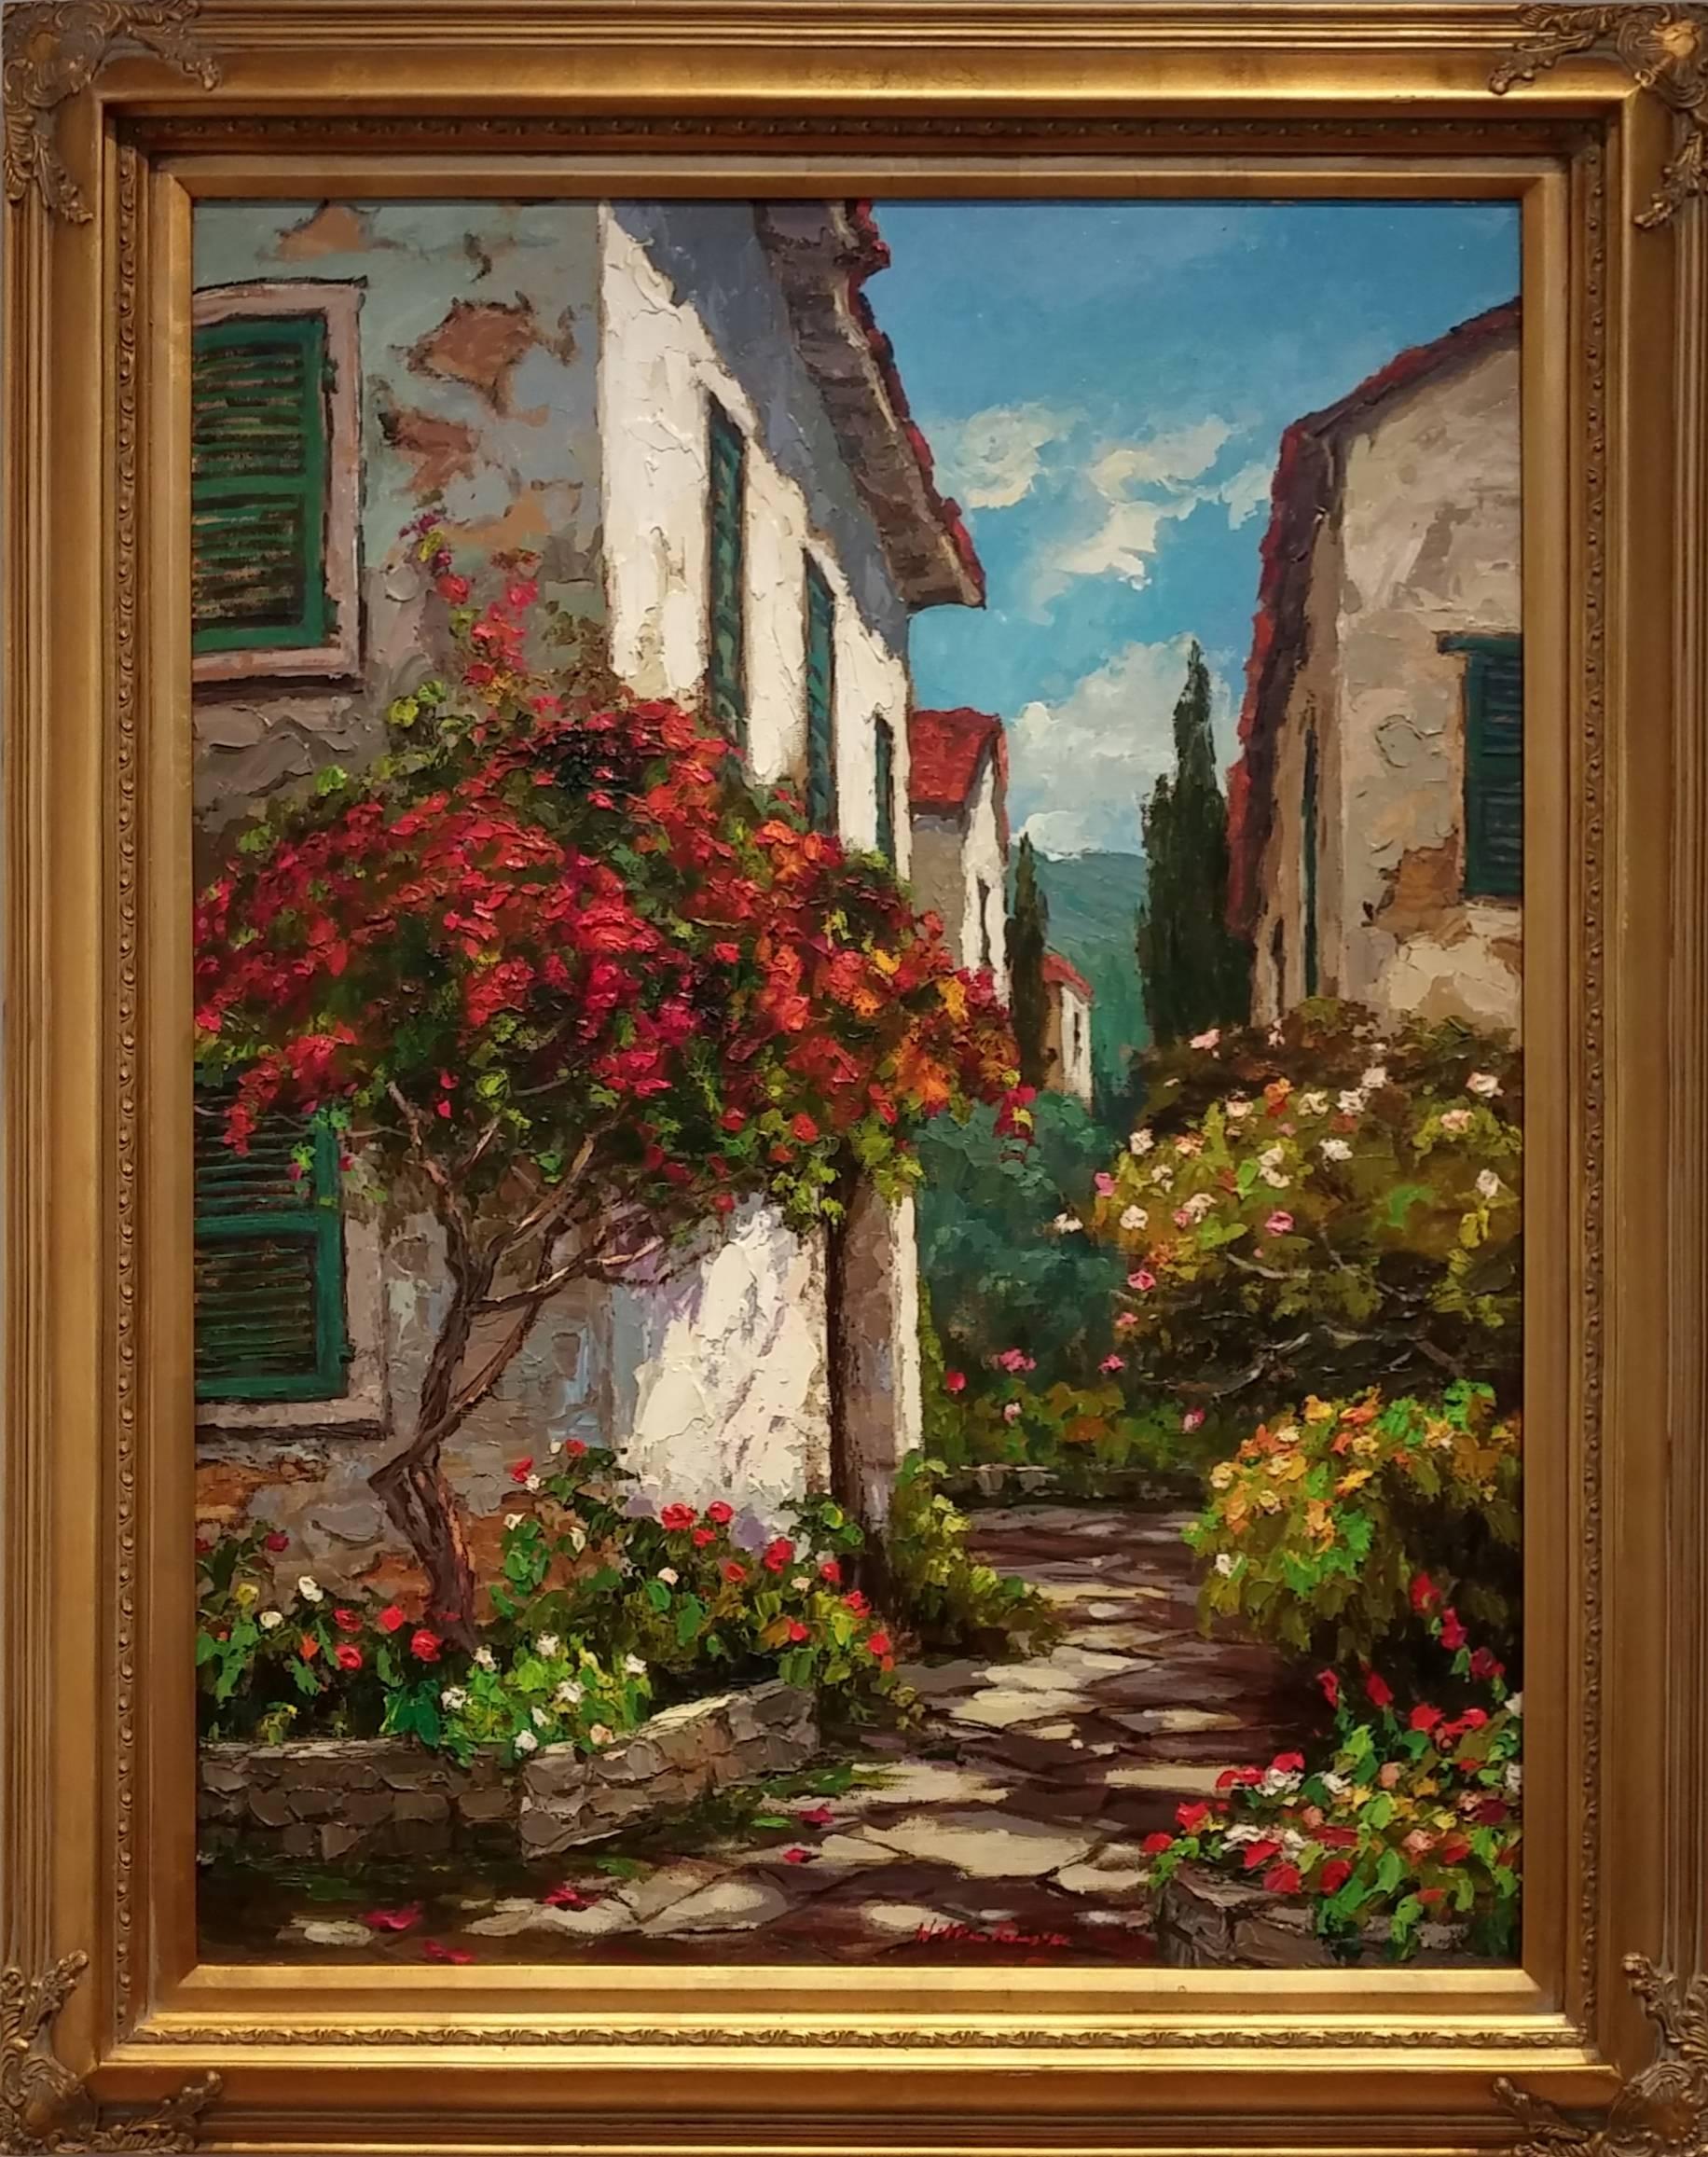 Garden Path - Italy - Impressionist Painting by William Rengifo